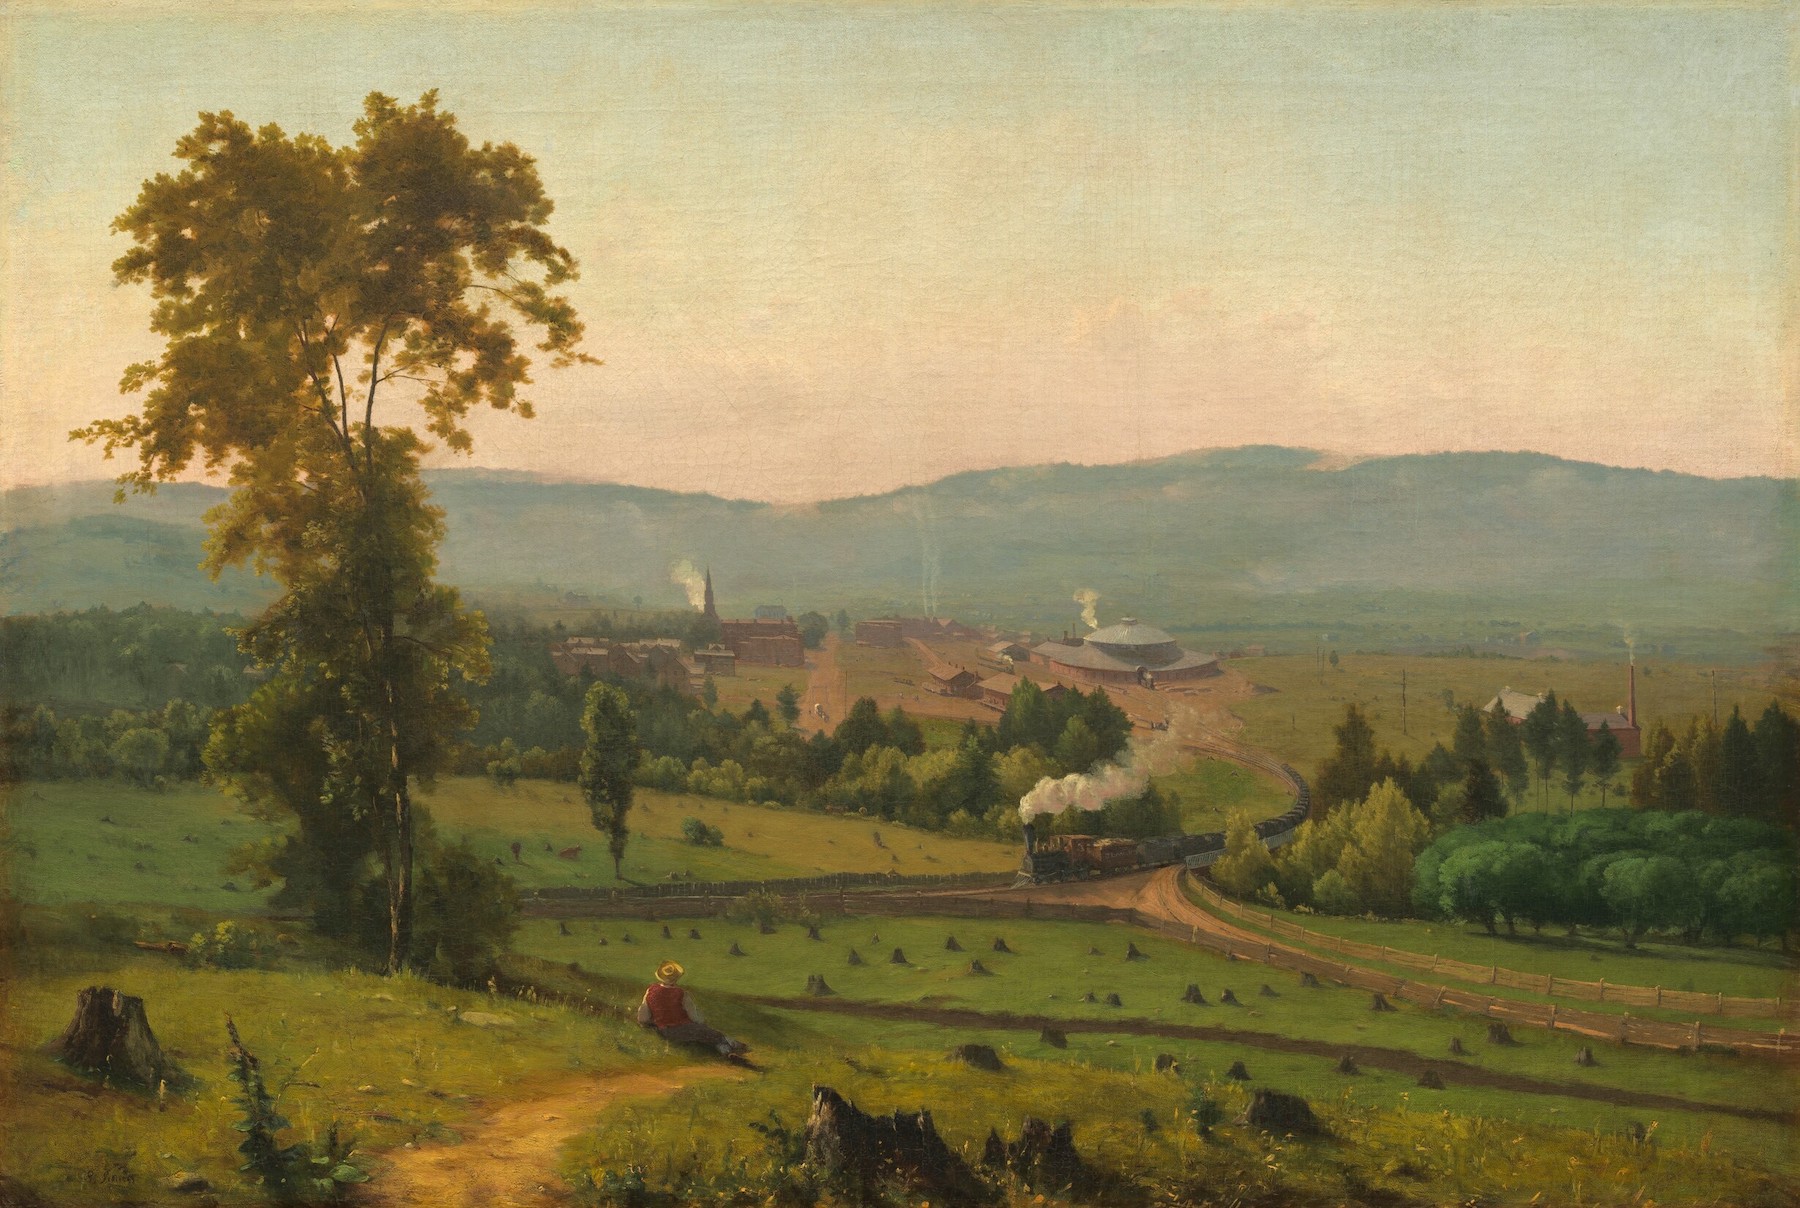 George Inness' landscape painting "The Lackawanna Valley"